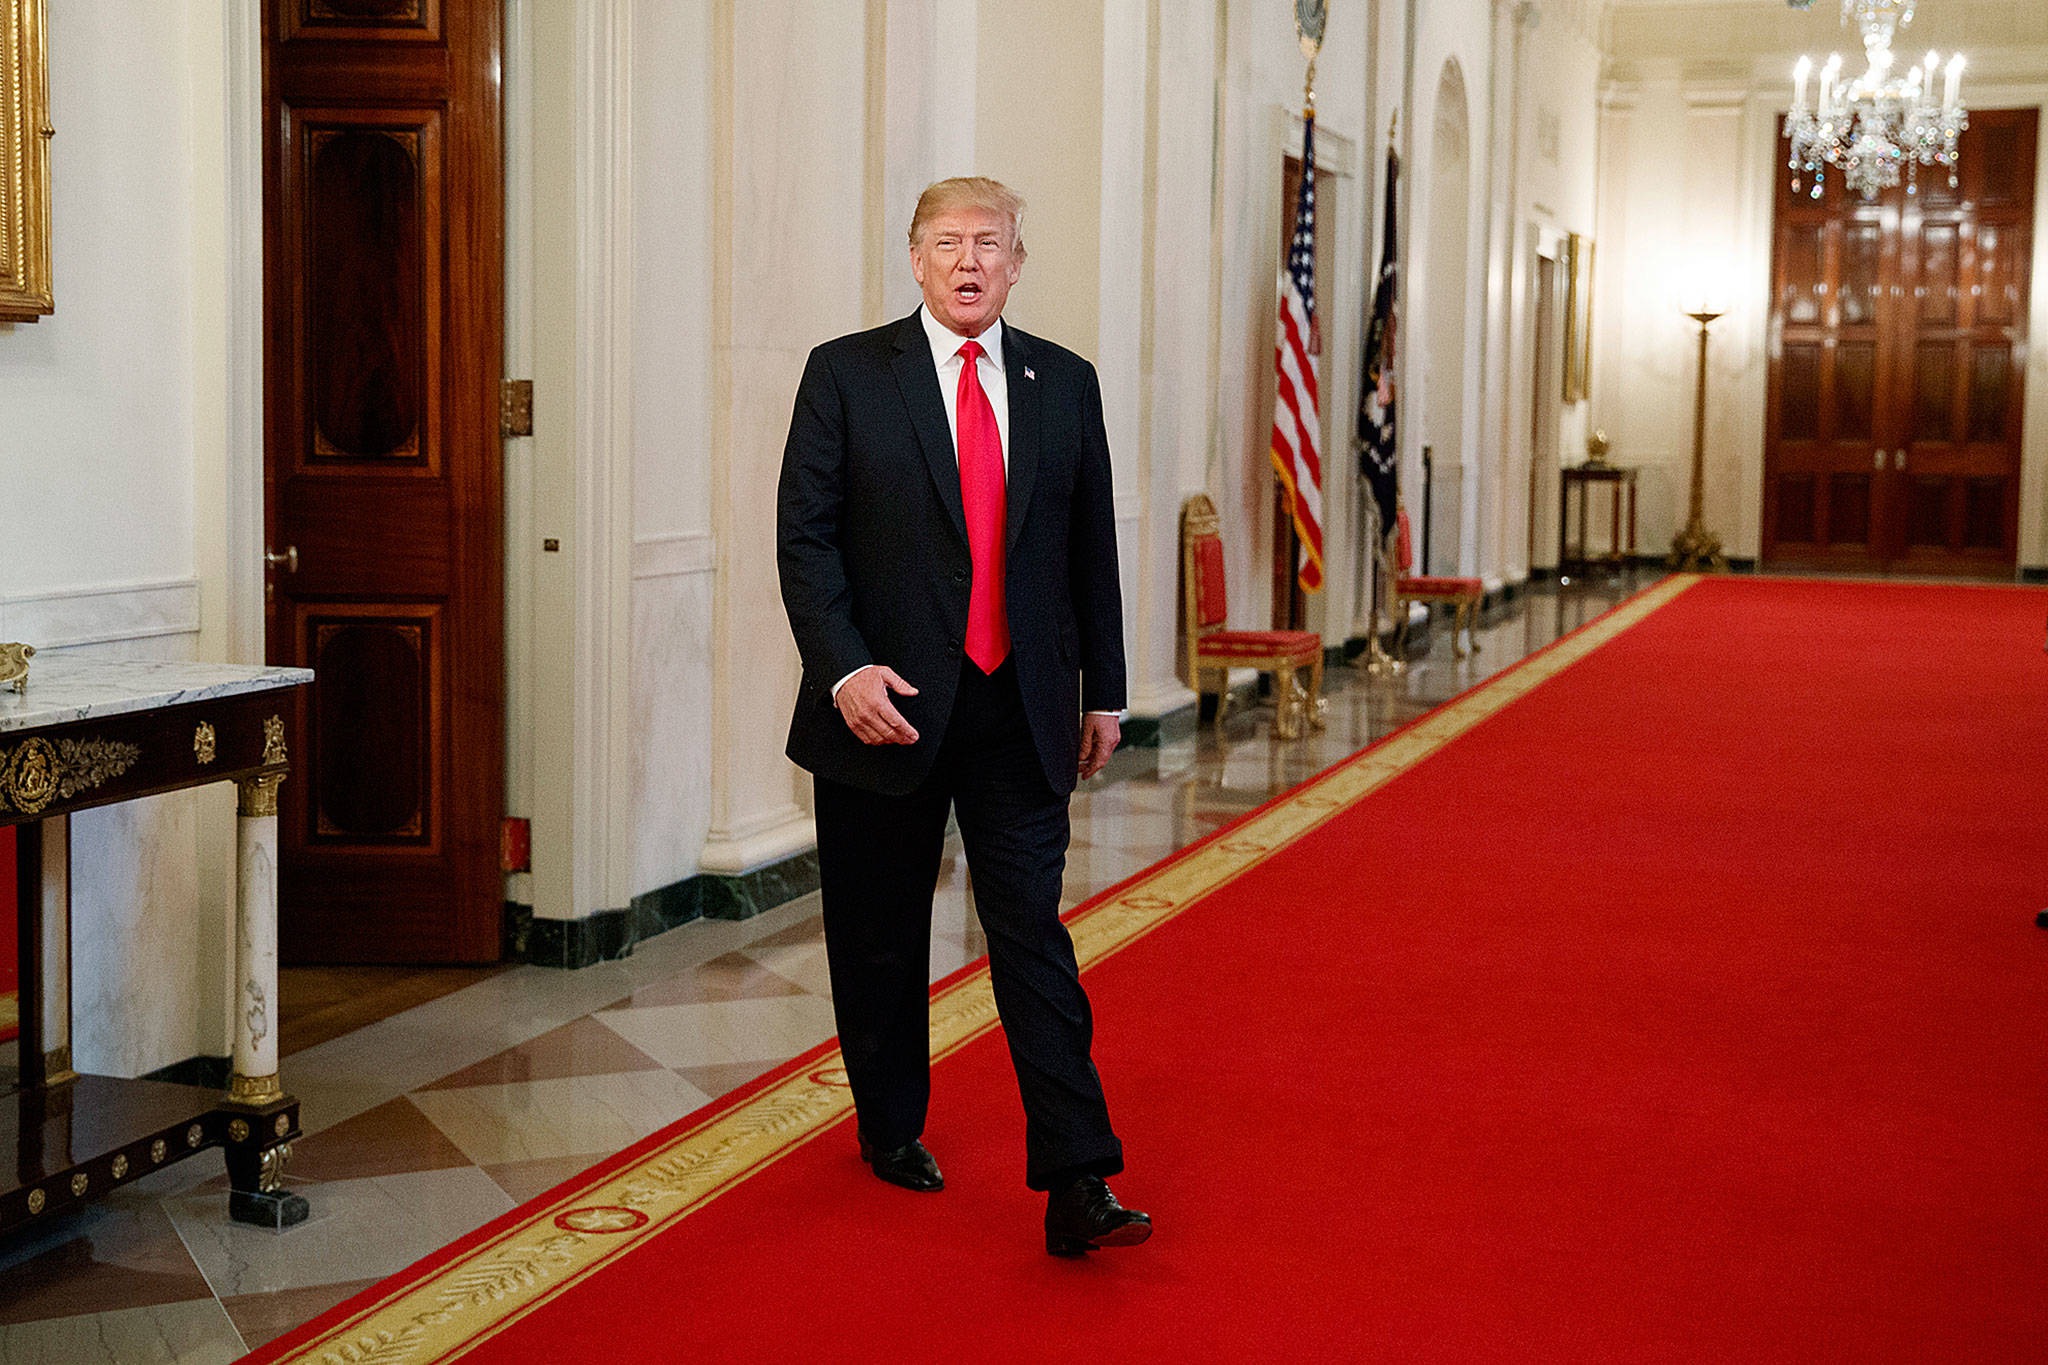 President Donald Trump arrives to speak to the White House Opioid Summit in the East Room of the White House on Thursday. (AP Photo/Evan Vucci)